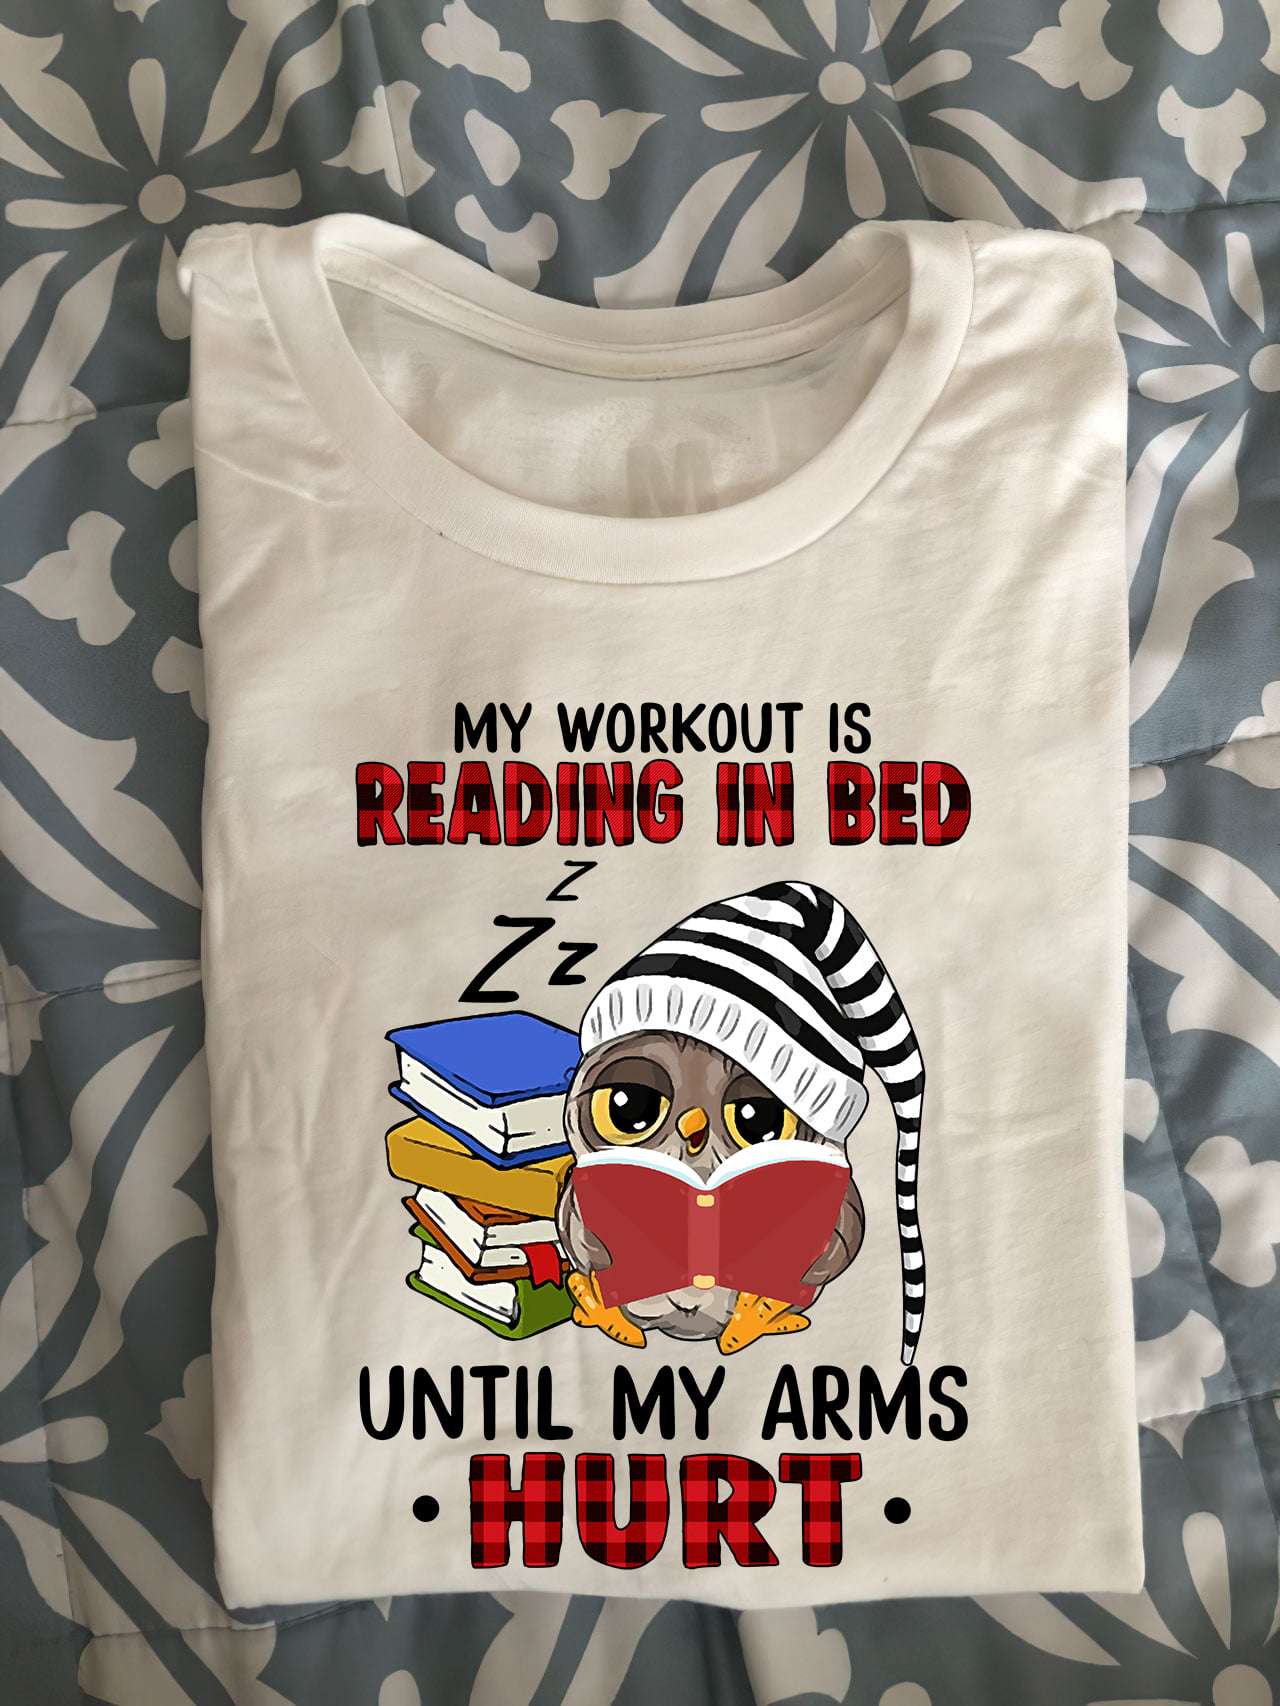 My workout is reading in bed until my arms hurt - Owl reading books